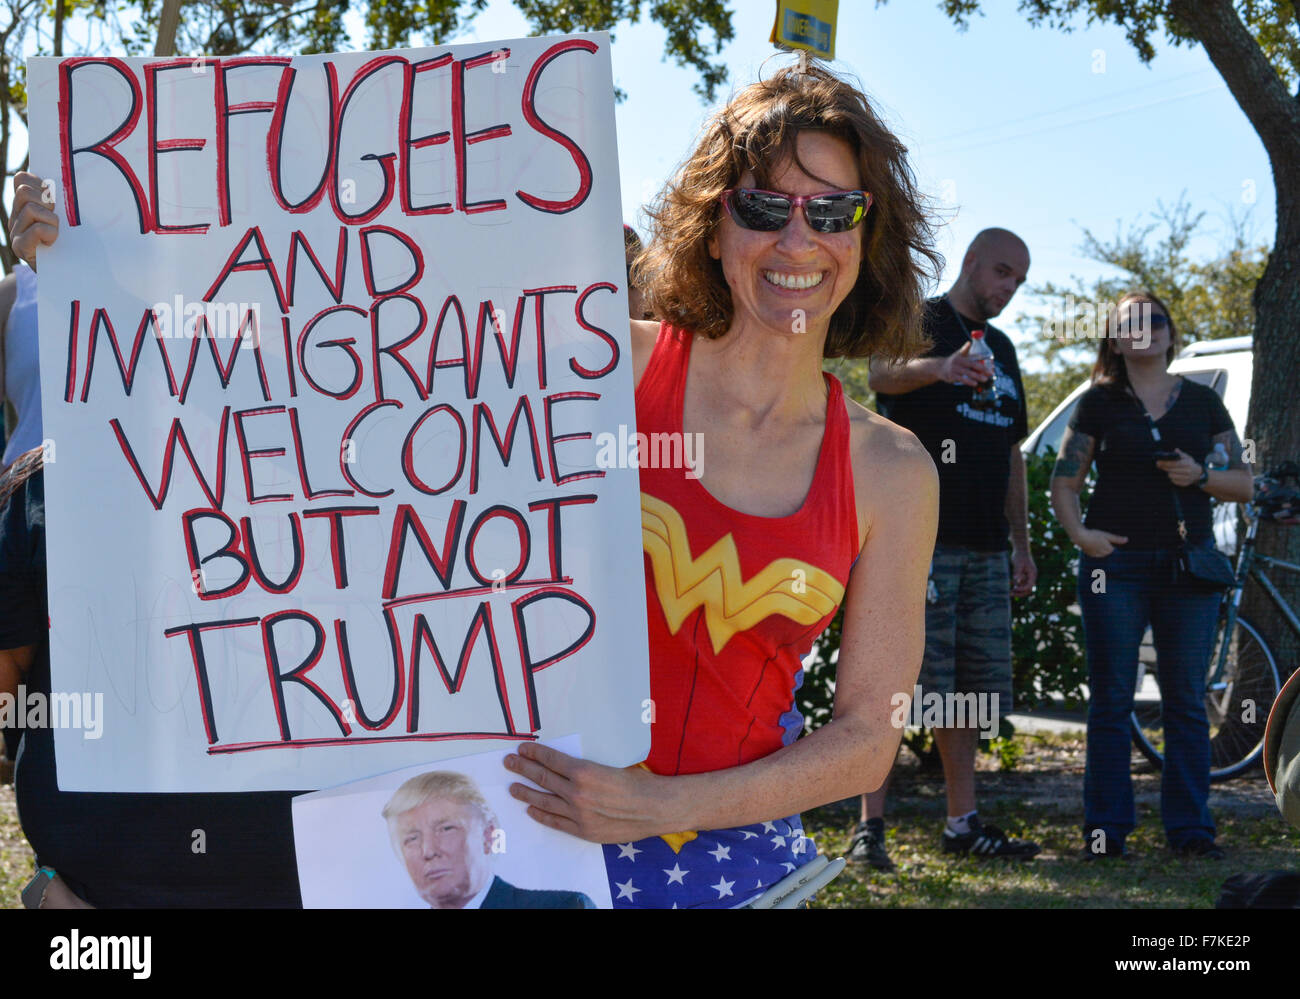 Woman in colorful Wonder woman type costume holds protest sign reading 'Refugees and immigrants welcome, but NOT TRUMP' at GOP Florida Rally Stock Photo